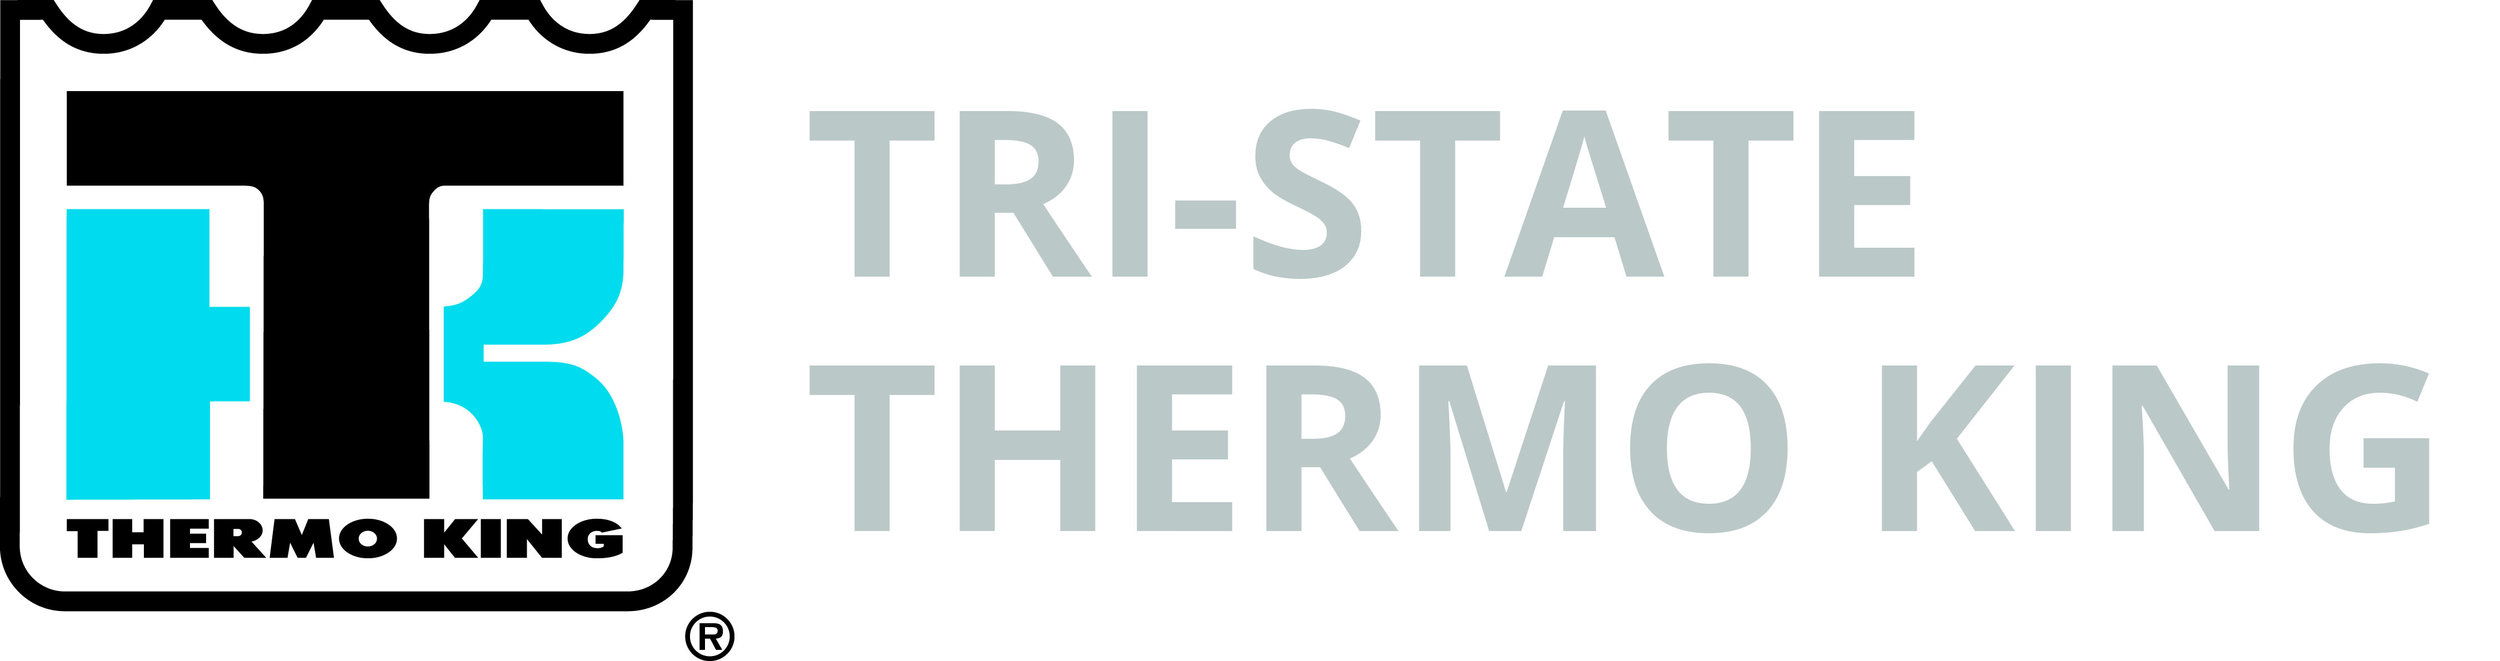 Tri-State Thermo King